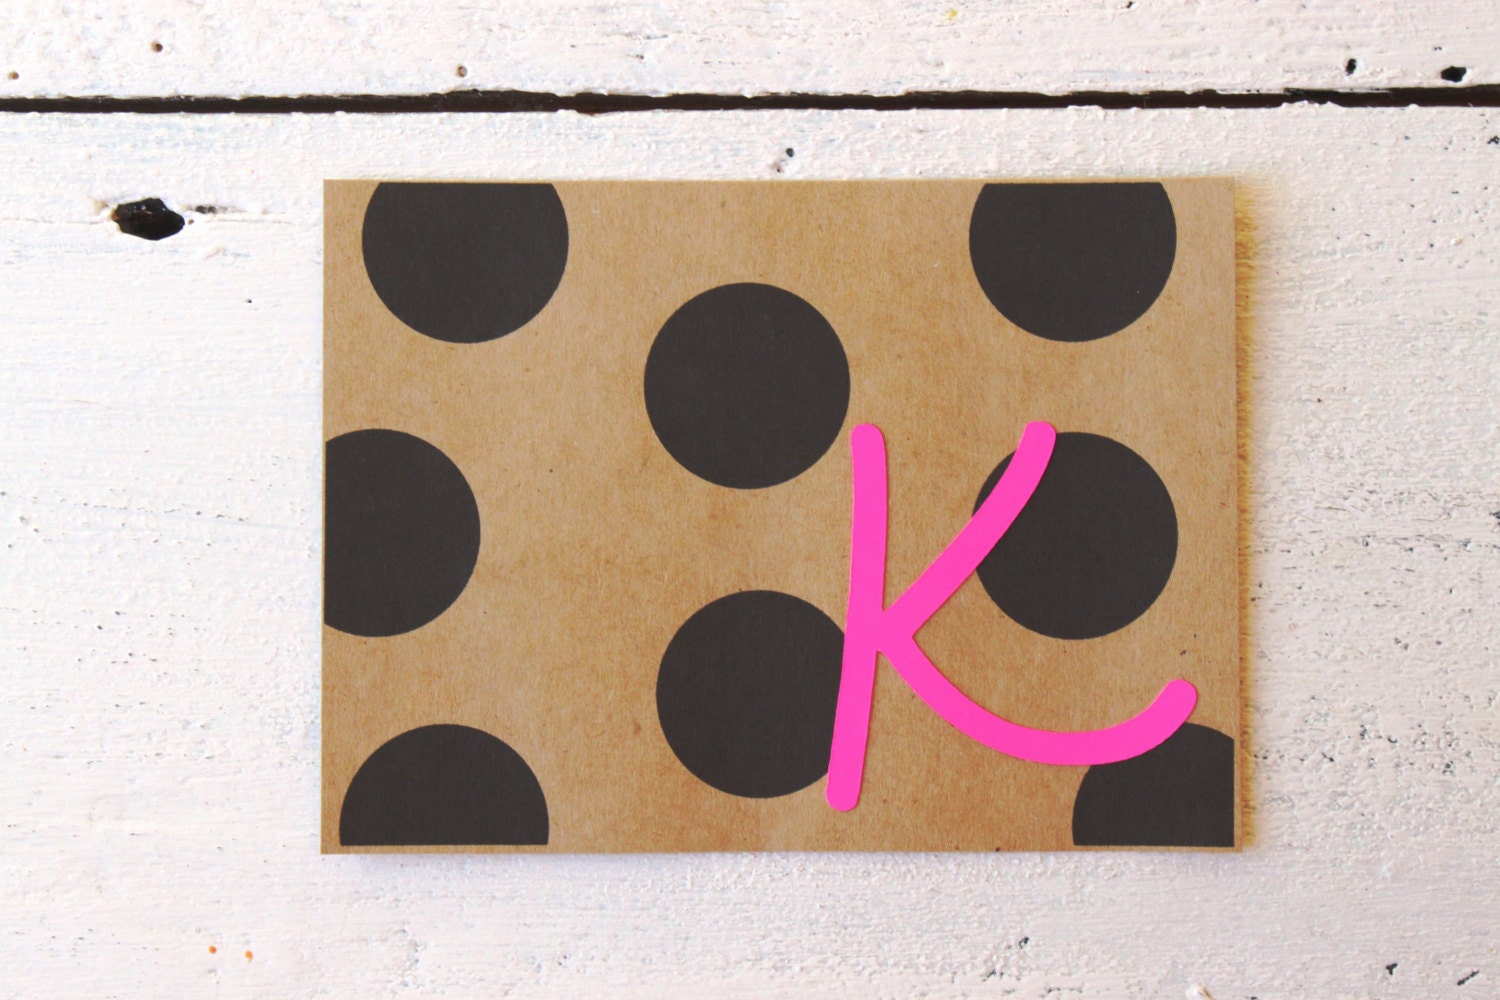 Custom Stationary Neon Pink Initial Stationery Polka Dot Kraft Paper Note Cards Hot Pink Personalized Stationary Grocery Bag - Set of 10 - WhenItRainsShop